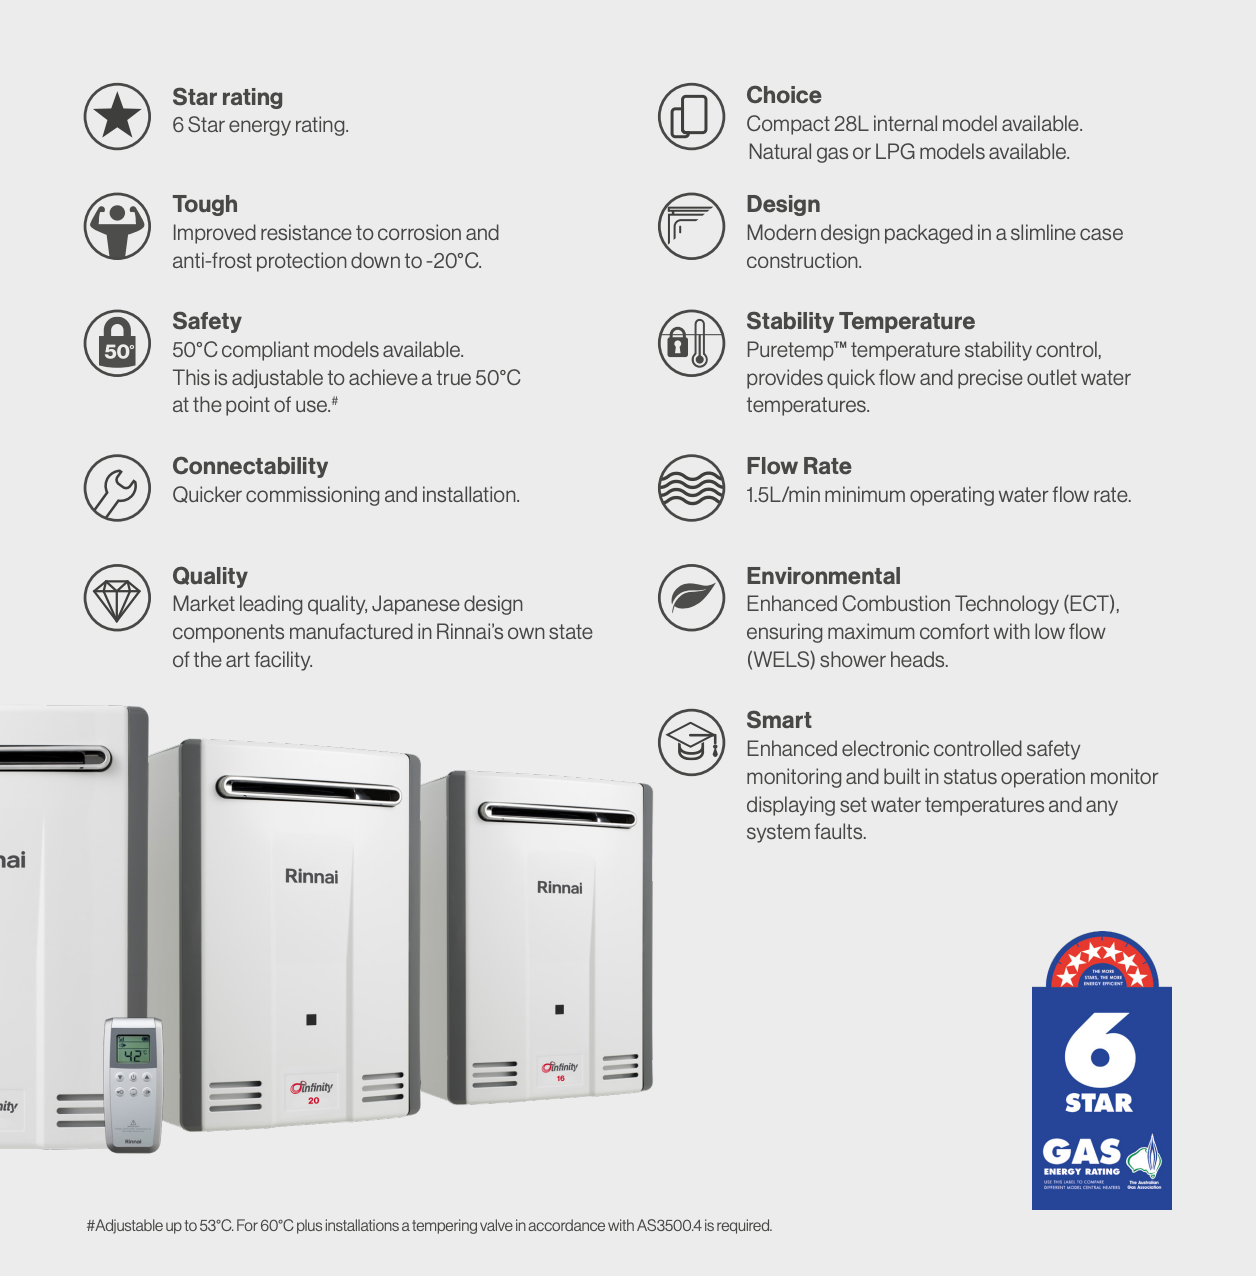 Rinnai Infinity INF12N50MA 12L 6.2 Star Continuous Flow Gas Water Heater (50°C Preset) Including Metro Perth Installation - Pacer Plumbing & Gas